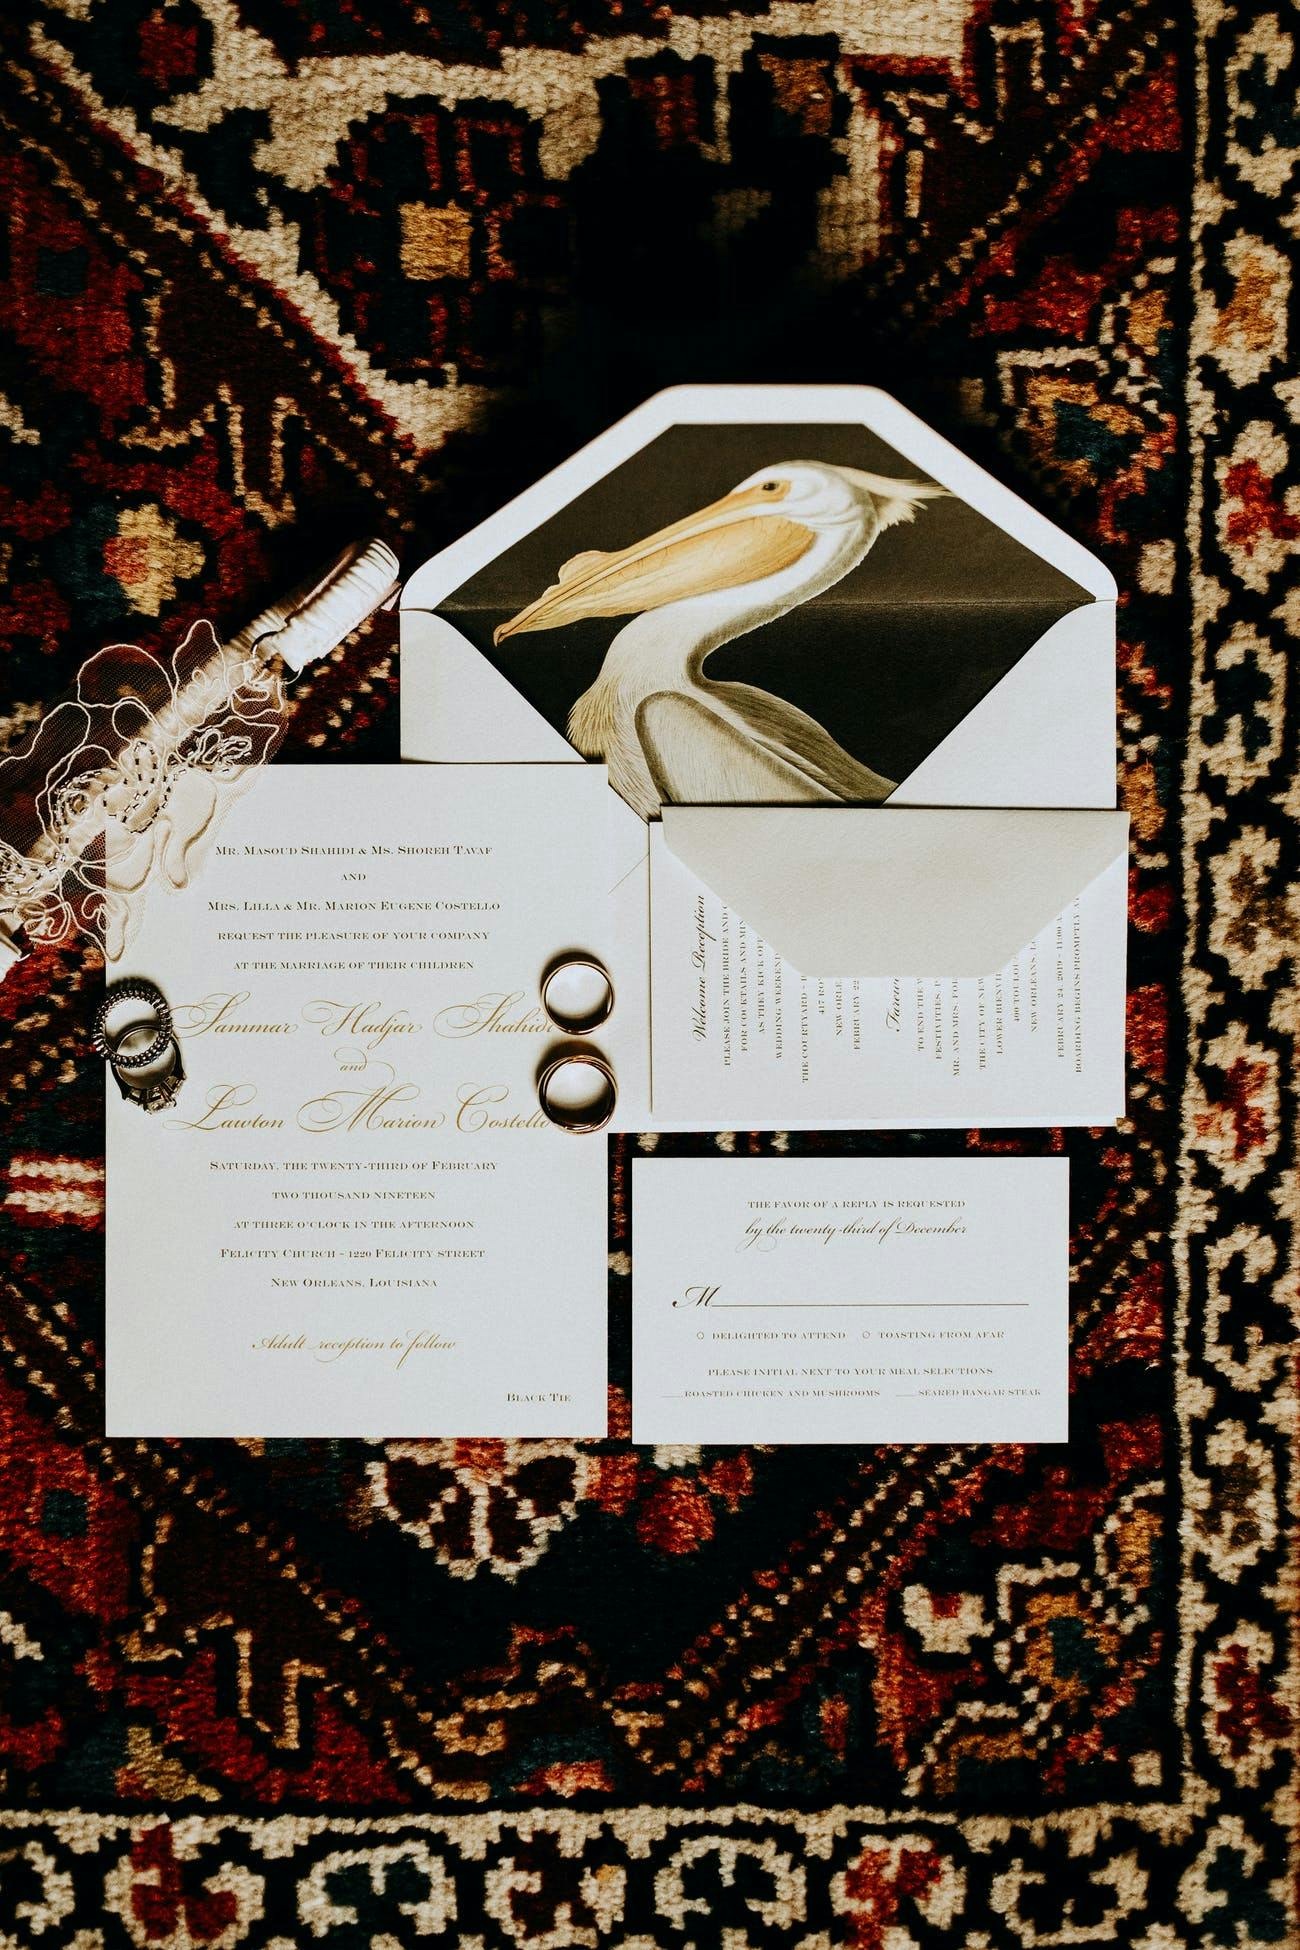 Wedding Invitation With Pelican Against Black Backdrop on Inner Envelope | PartySlate